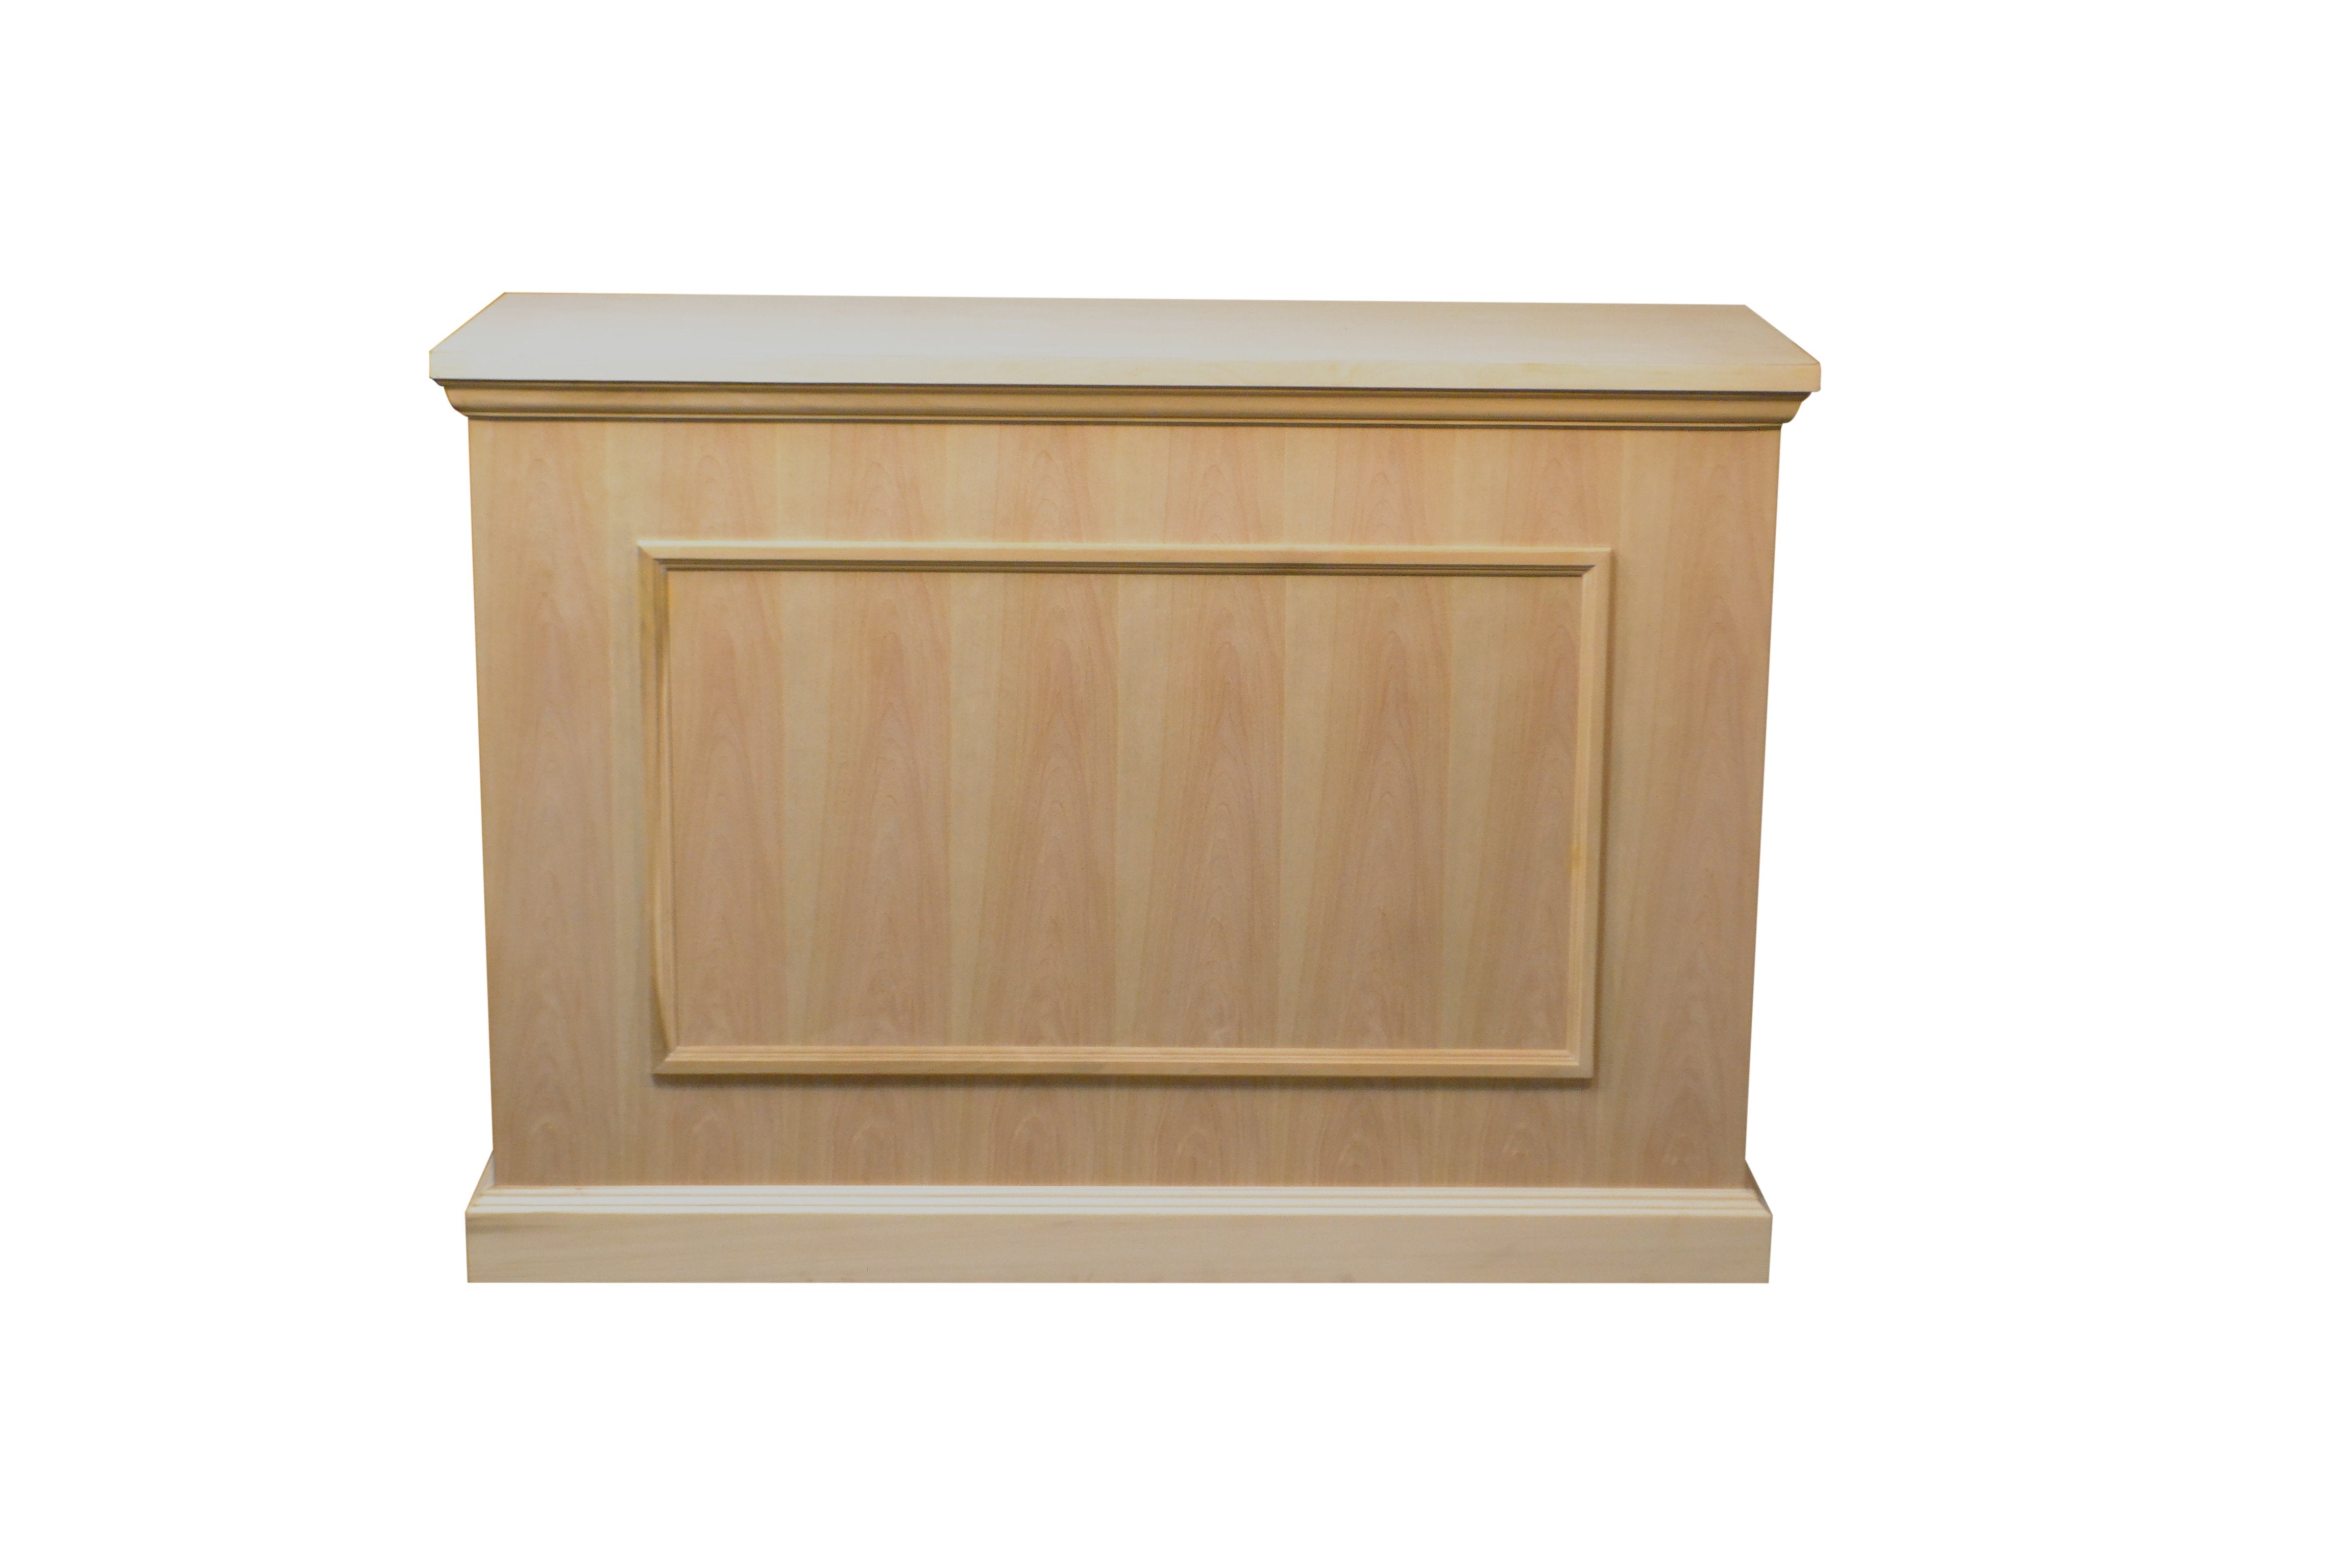 Mini Elevate 75012 Unfinished TV Lift Cabinet for  Flat screen TVs - Touchstone Home Products, Inc.